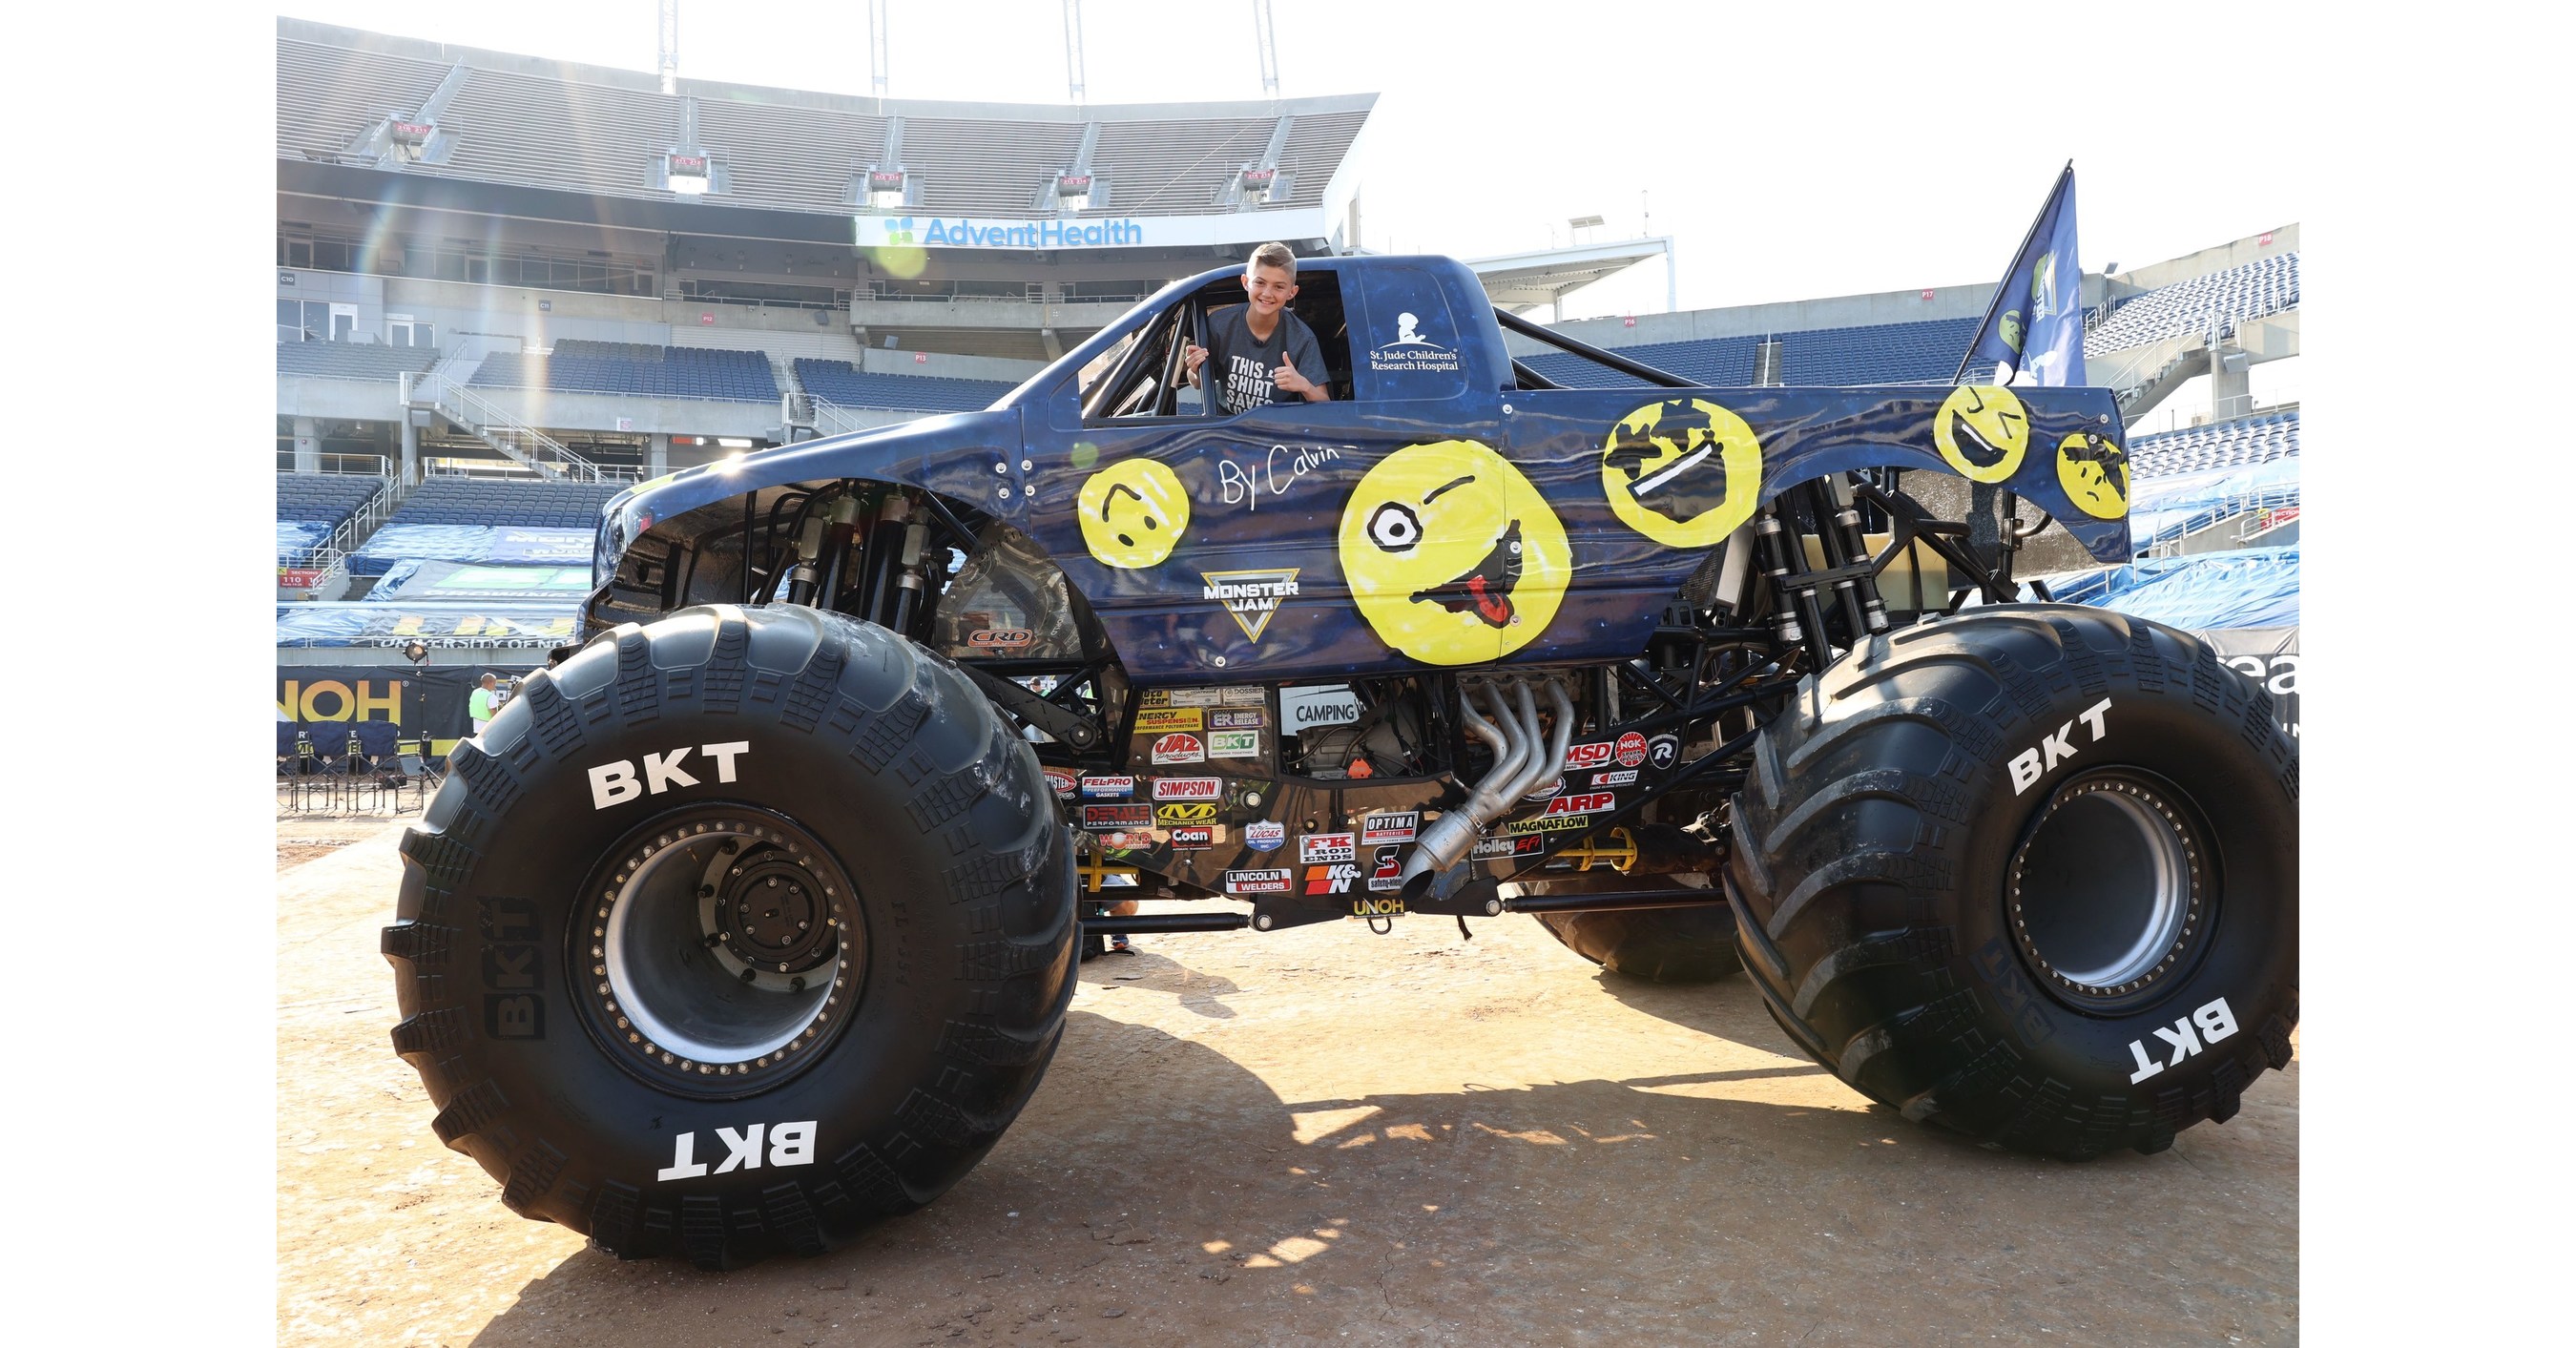 St. Jude patient designs Monster Jam toy truck, surprised with